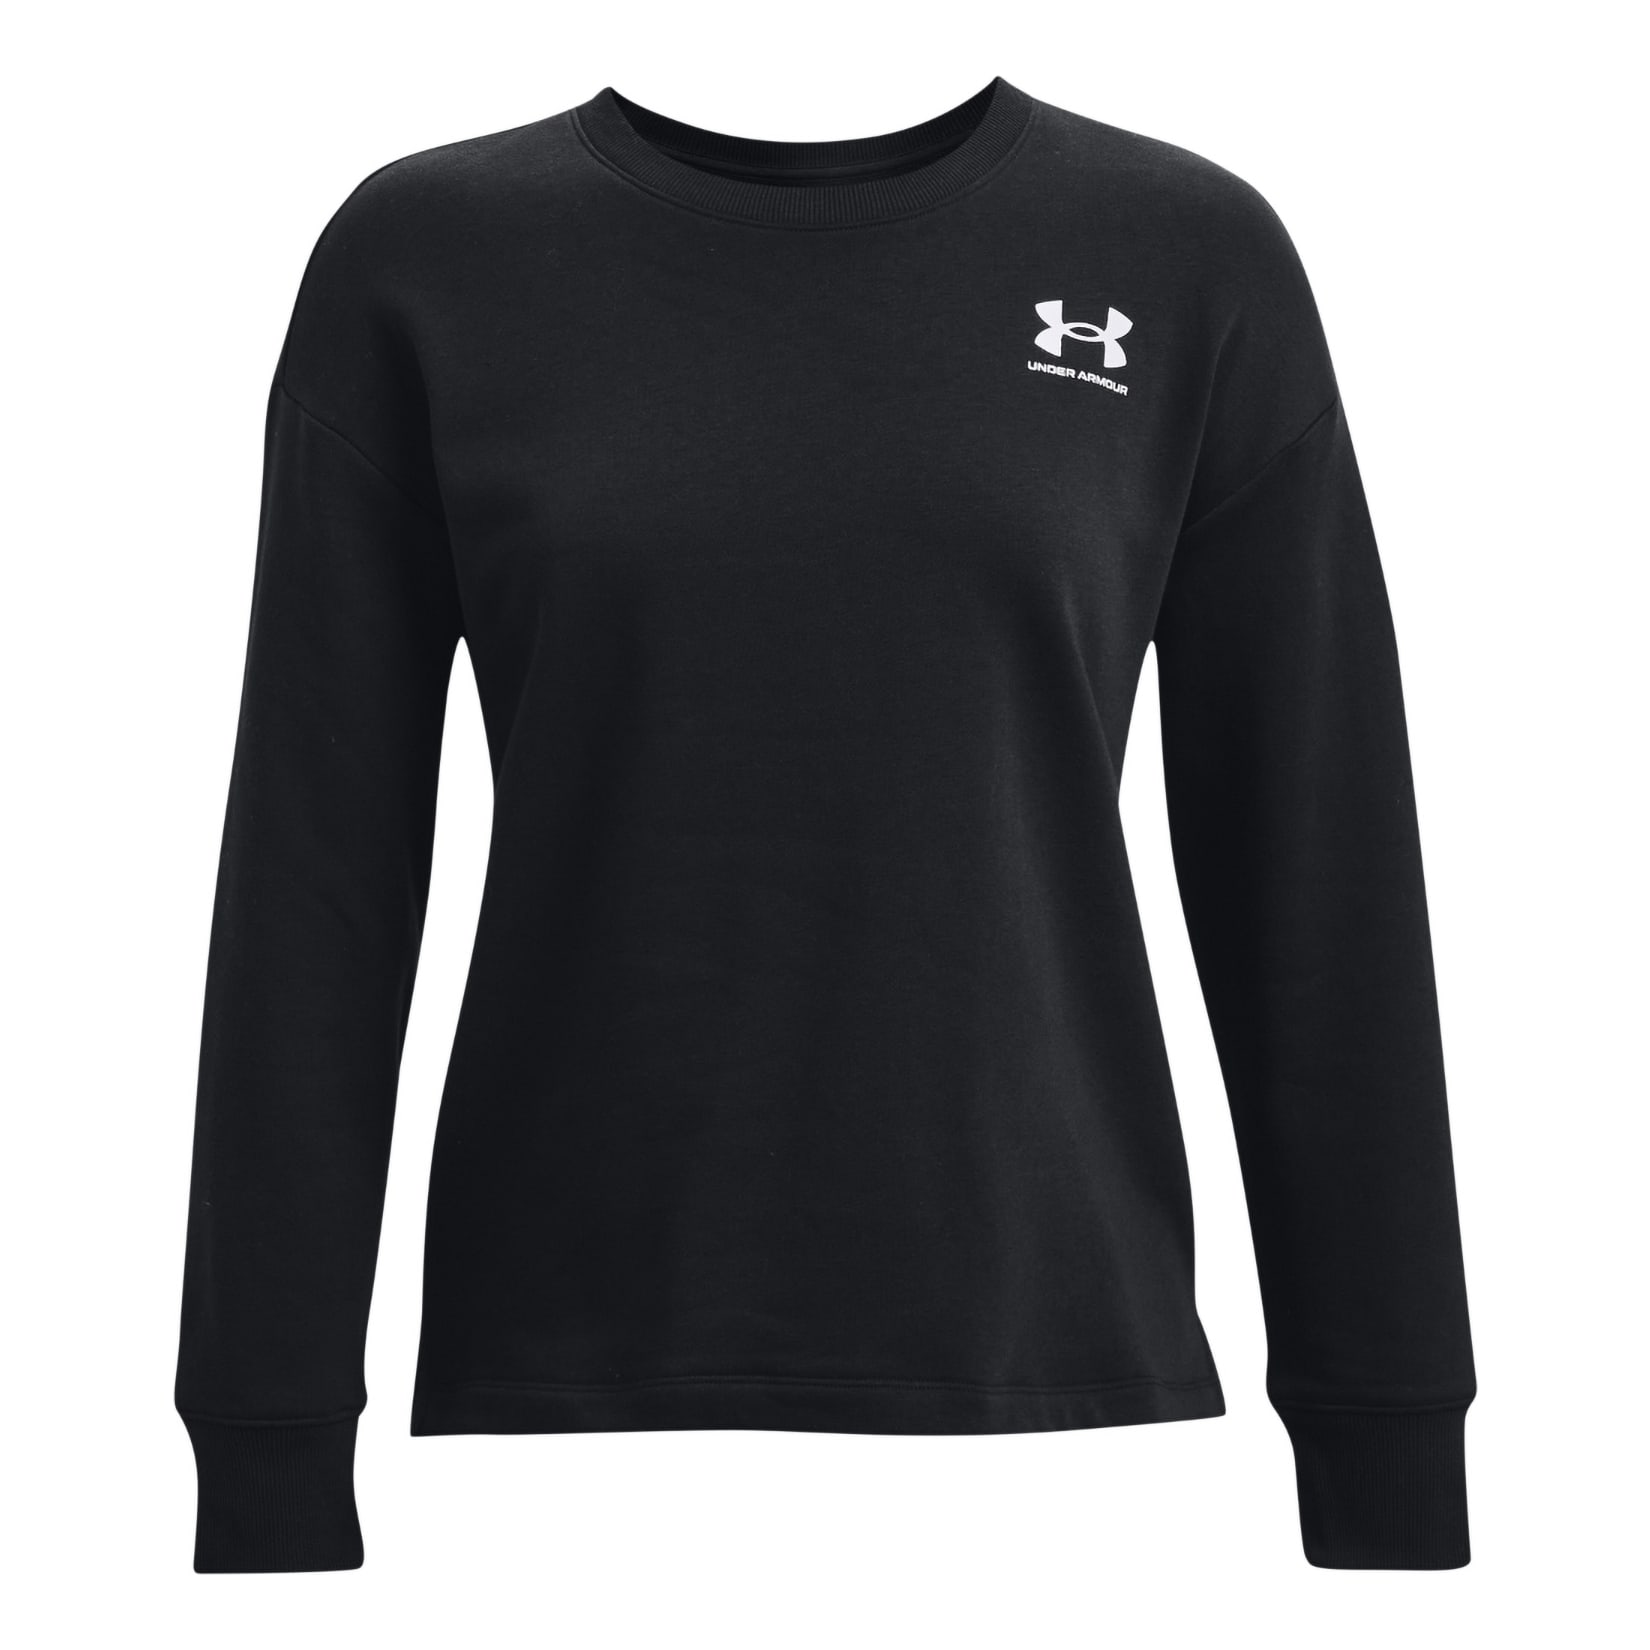  Under Armour Womens Live Sportstyle Graphic Short